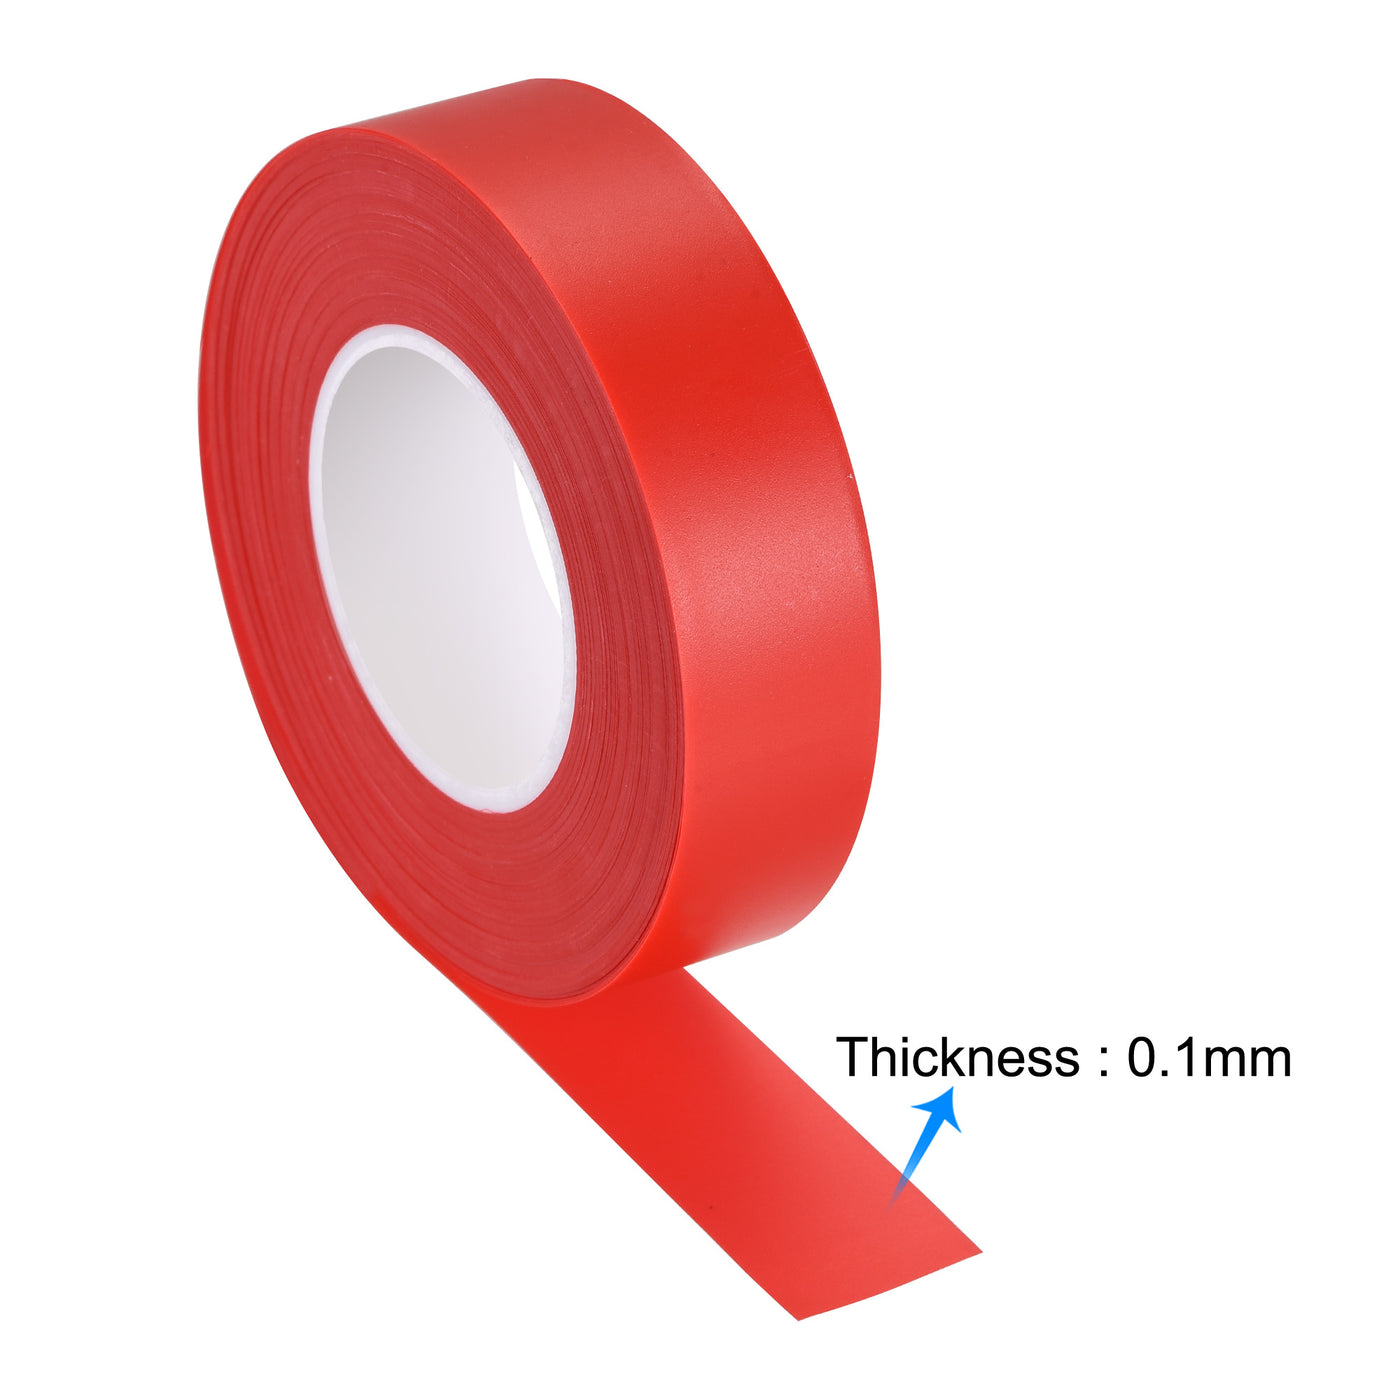 uxcell Uxcell PVC Flagging Tape 20mm x 20m/65.6ft Marking Tape Non-Adhesive Red 3pcs